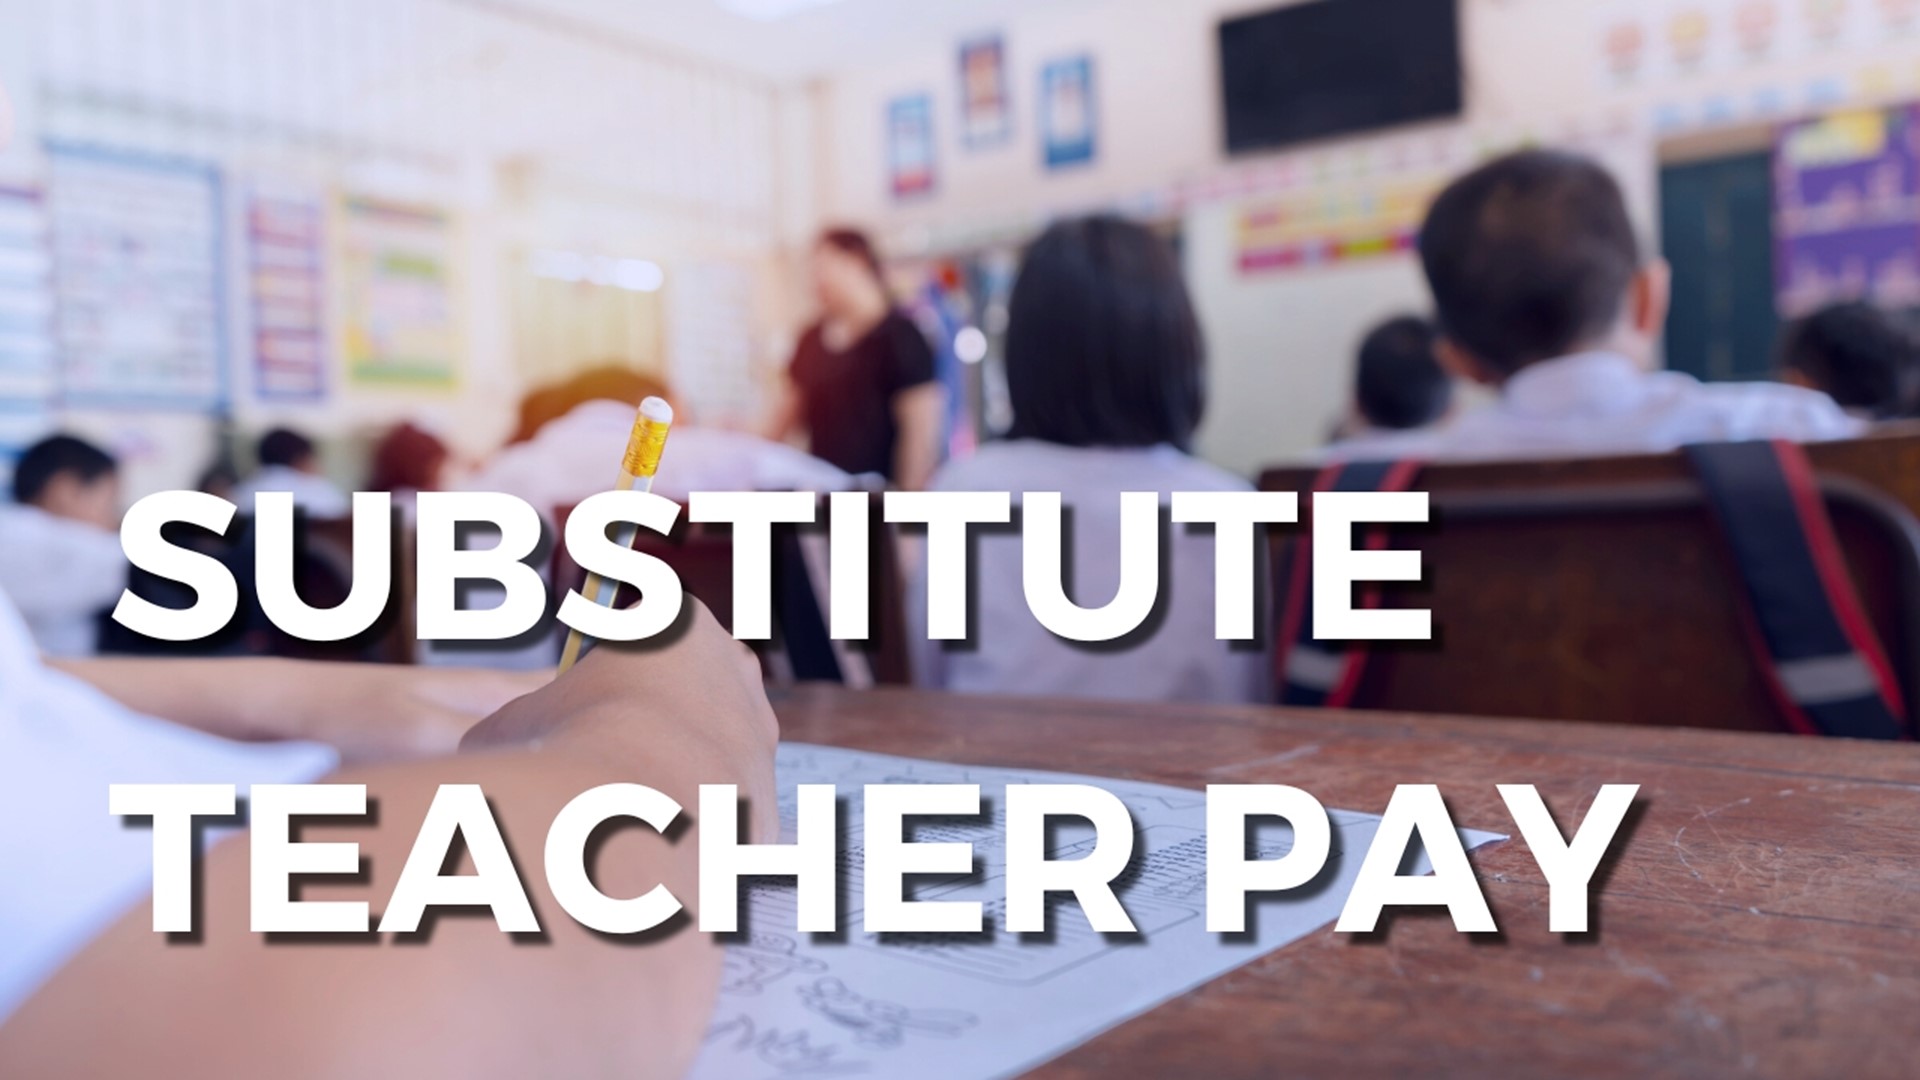 Many have wondered what substitute teachers make and if they can help fill open teacher slots. We dug into top questions and found answers.